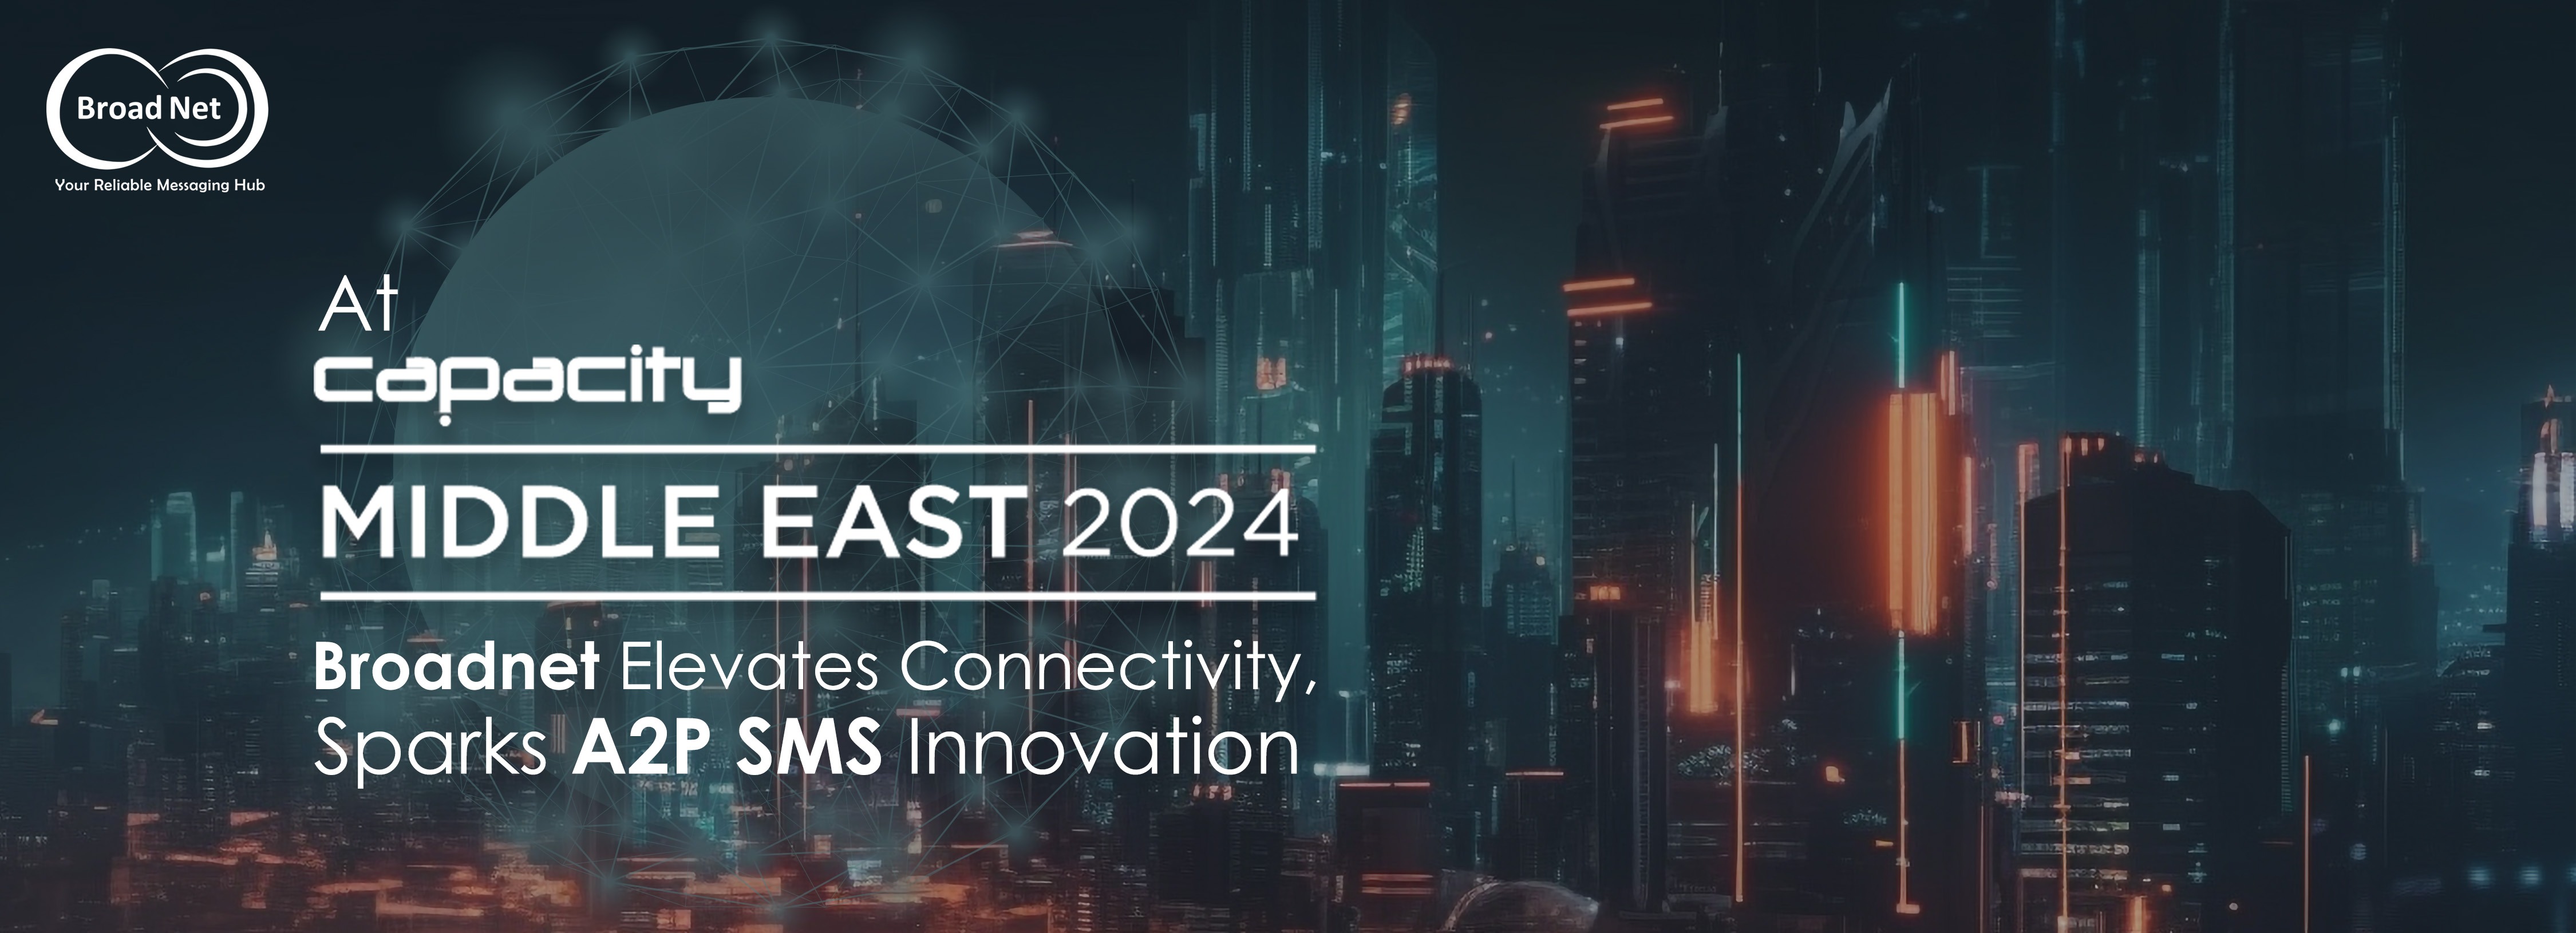 At Capacity Middle East 2024: Broadnet Elevates Connectivity, Sparks A2P SMS Innovation